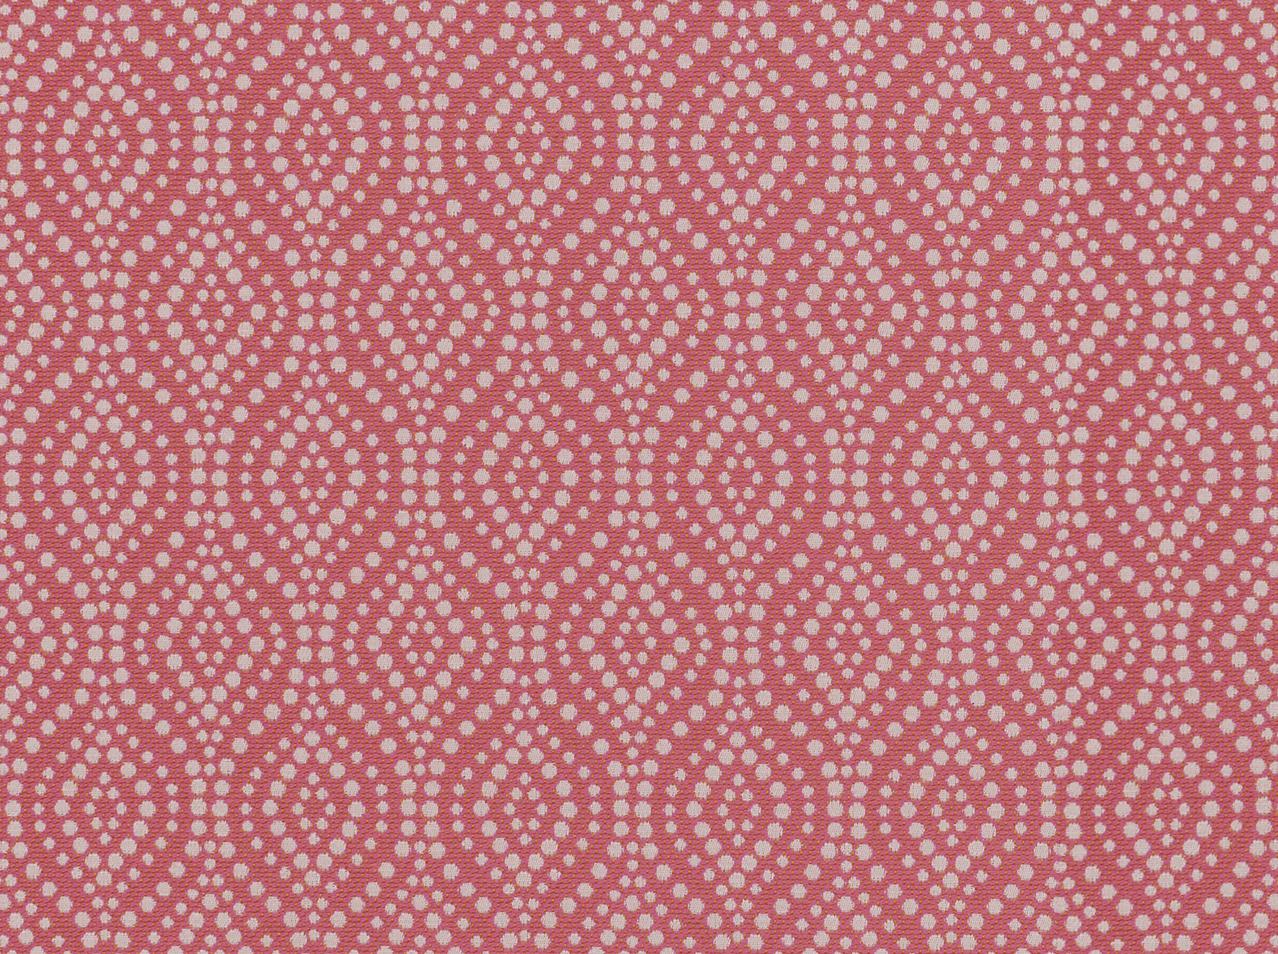 Covington Squeeze 787 Begonia Pink Fabric